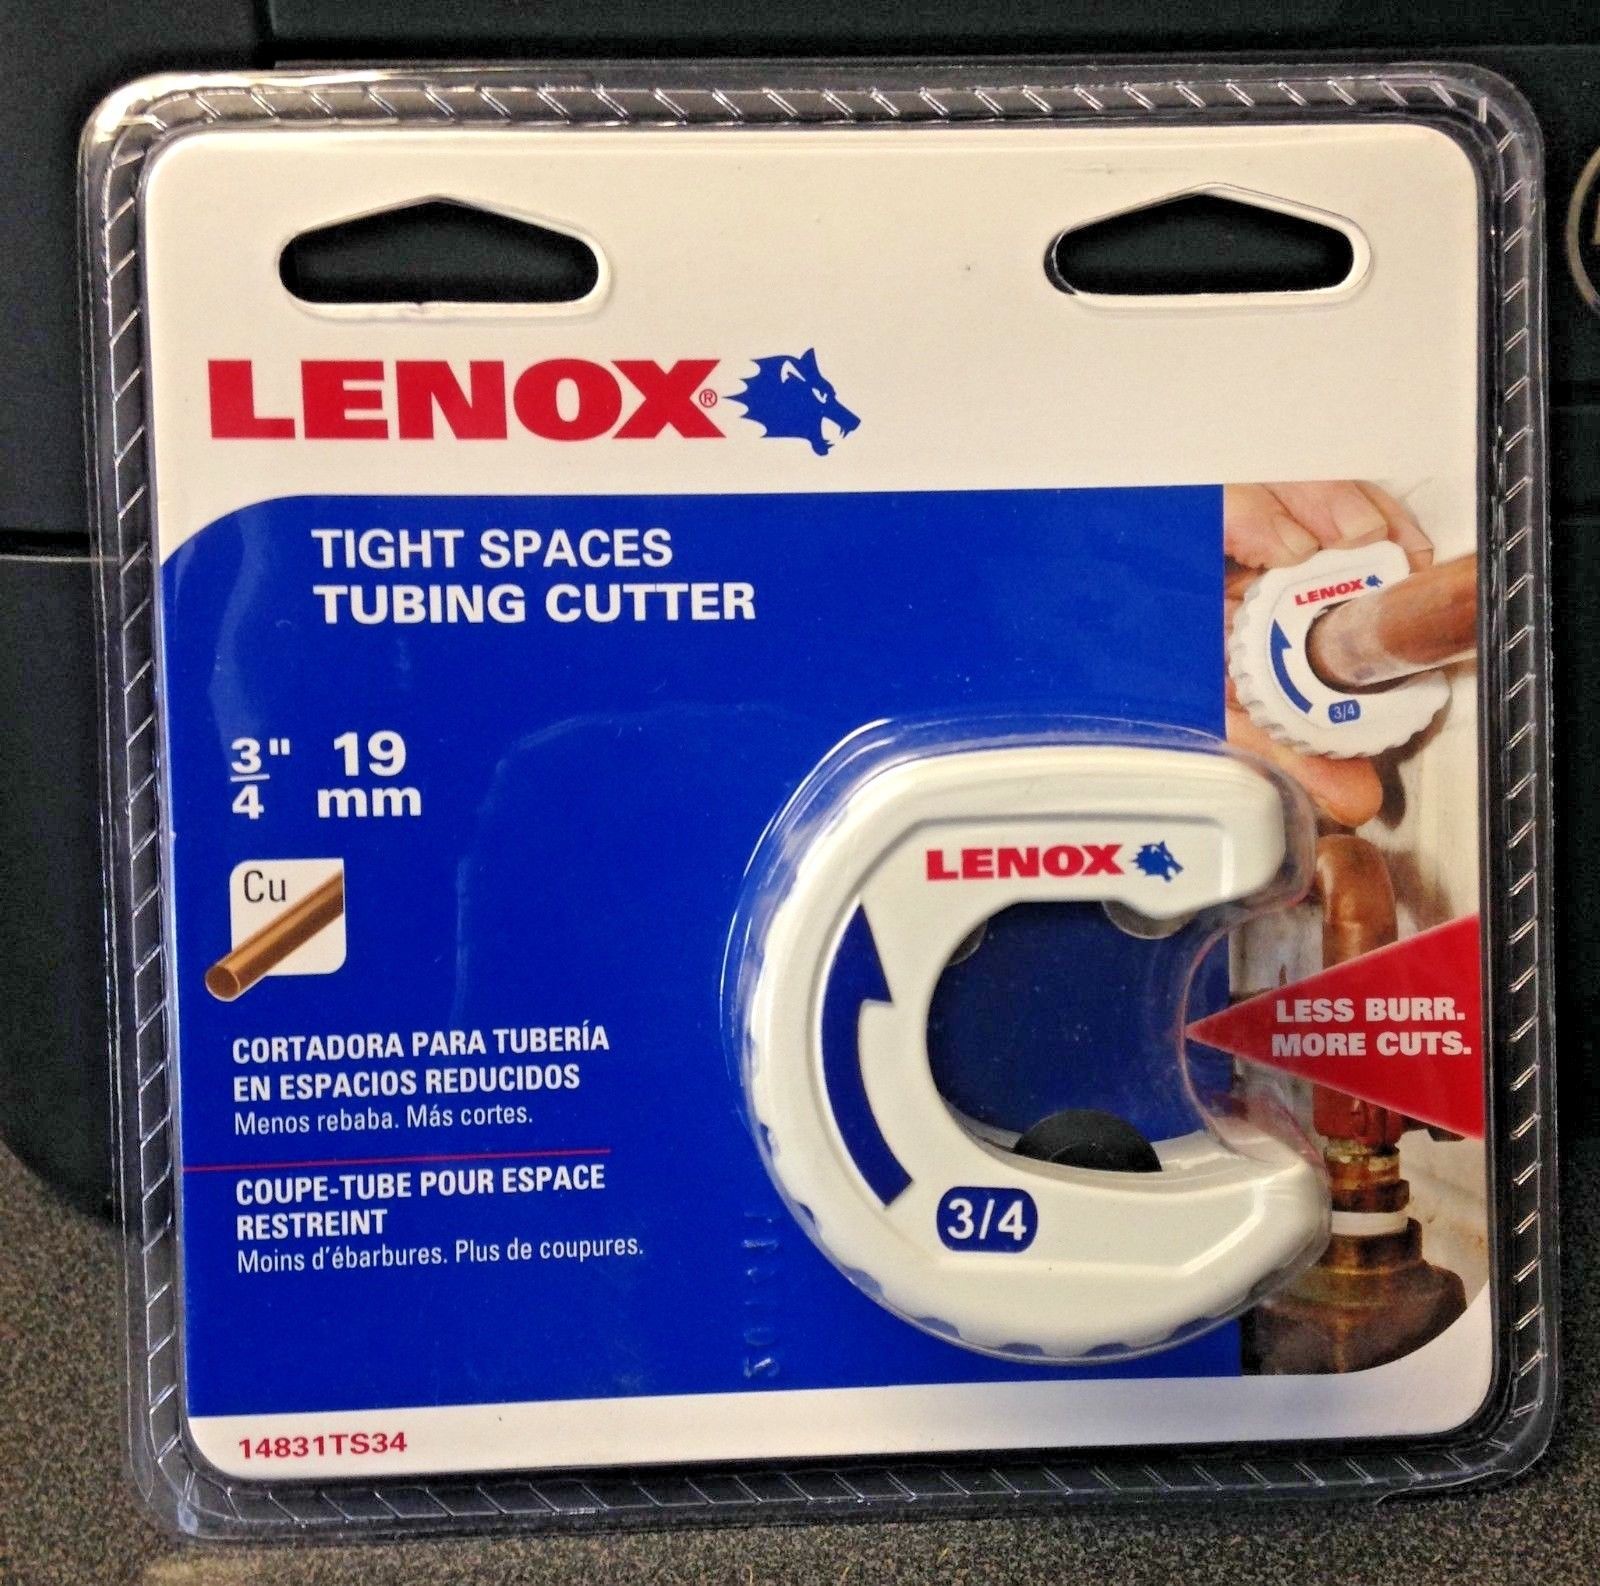 Lenox 14831TS34 3/4" Tight Spaces Tubing Cutter